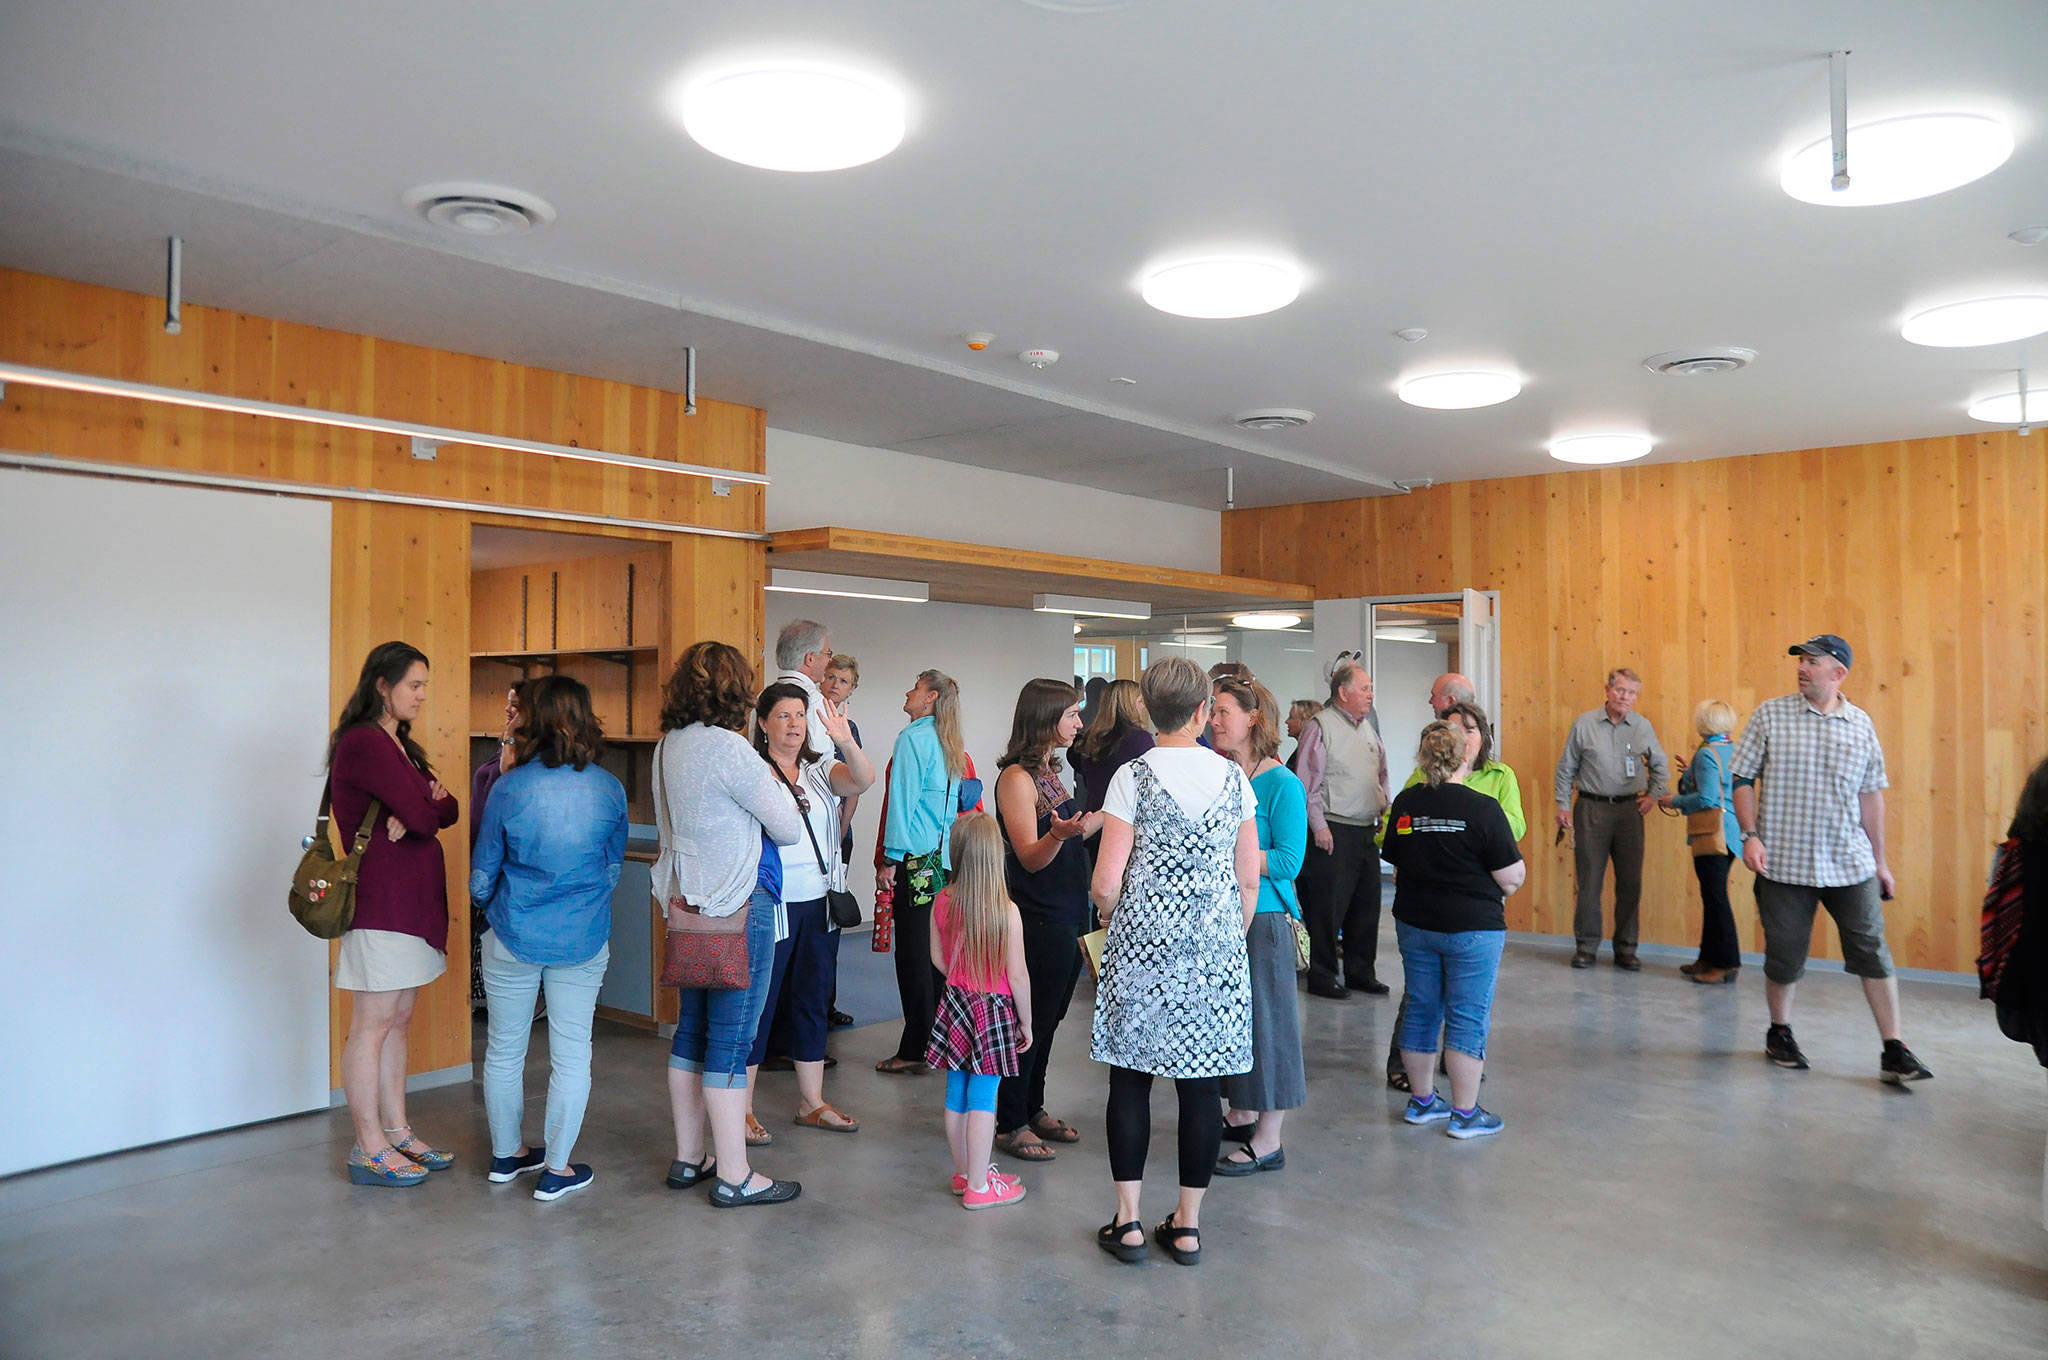 Attendees of a ribbon-cutting at Greywolf Elementary School get a first look inside the school’s new building built using cross-laminated timber. (Michael Dashiell/Olympic Peninsula News Group)